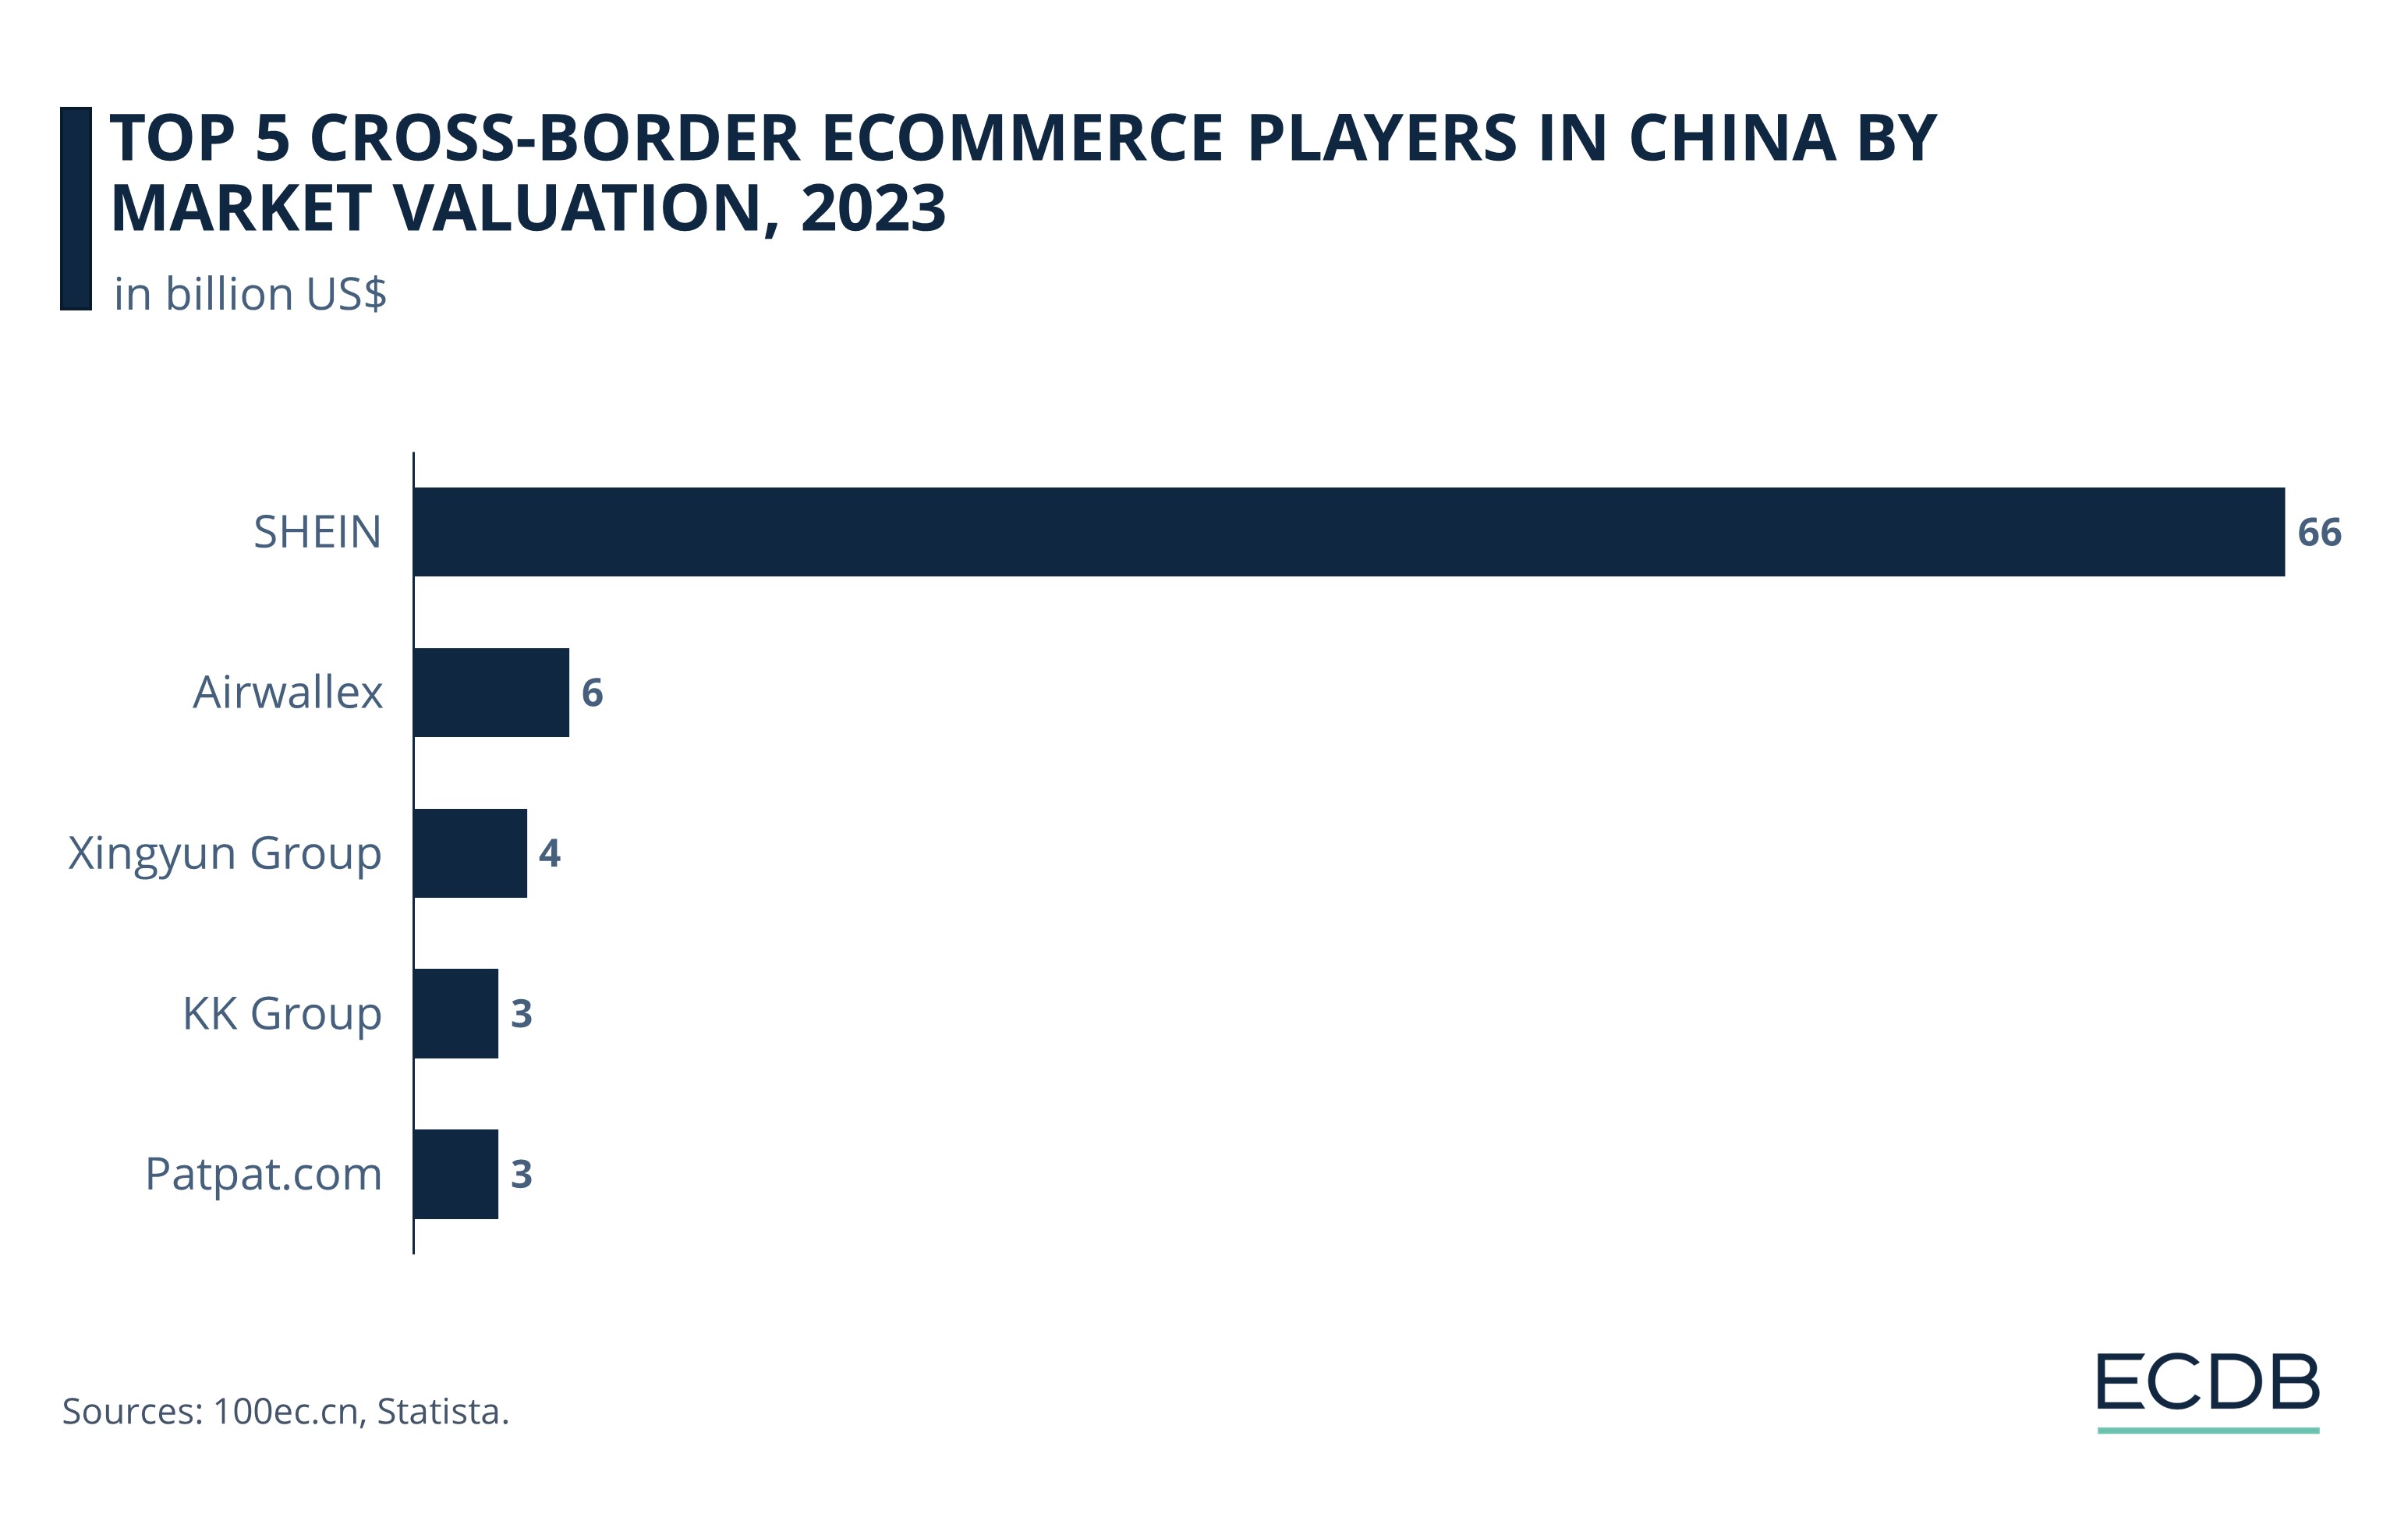 Top 5 Cross-Border eCommerce Players in China by Market Valuation, 2023